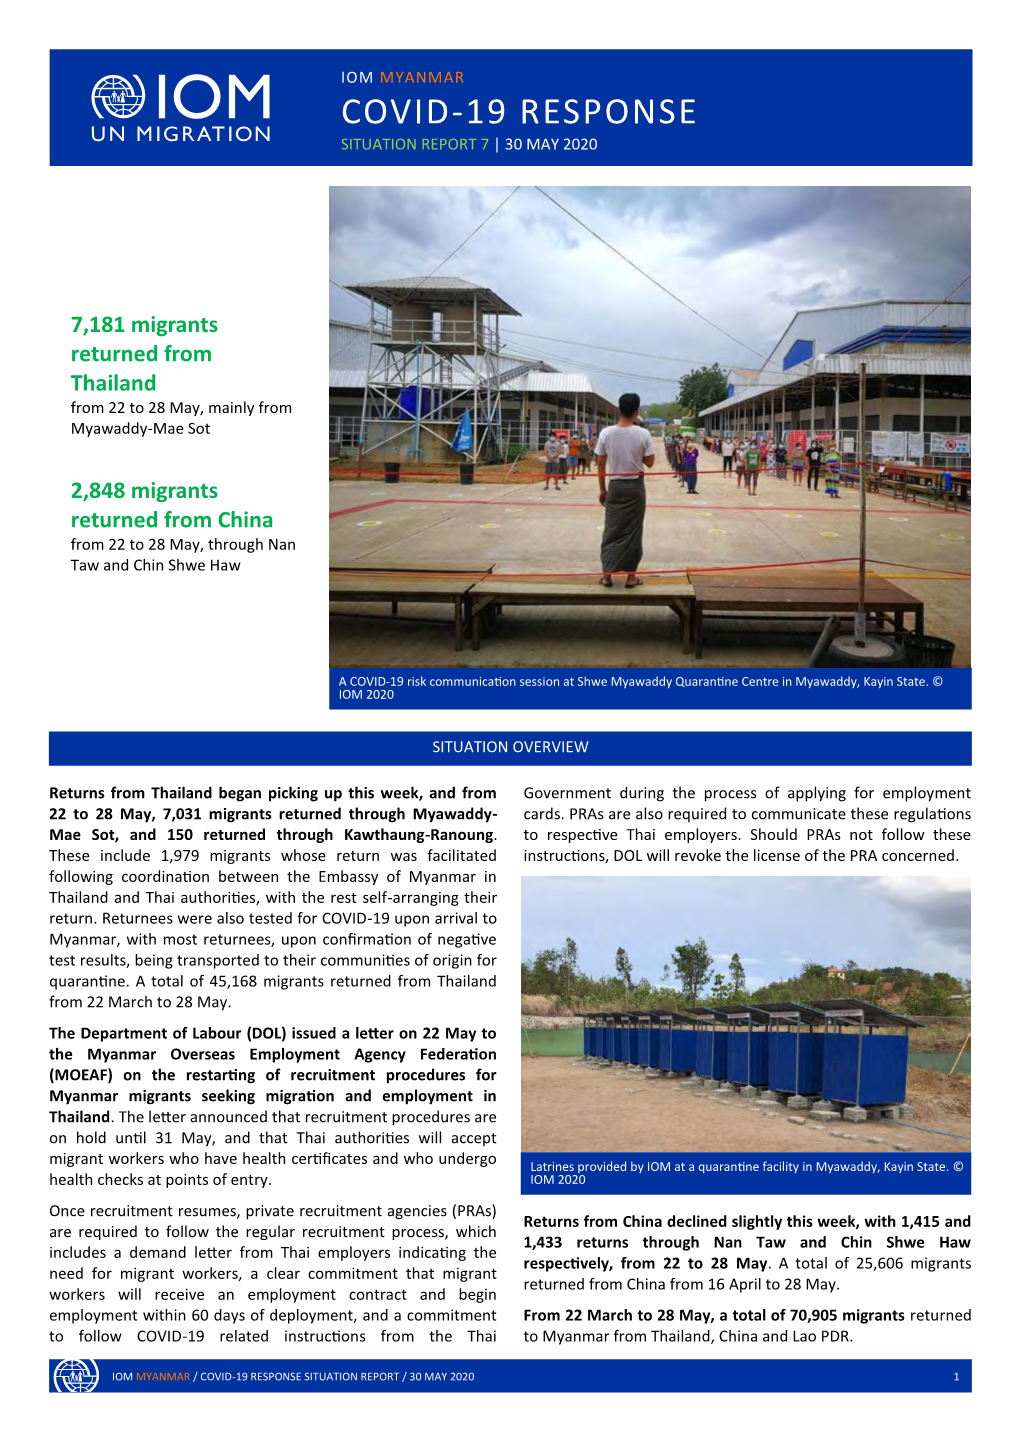 Covid-19 Response Situation Report 7 | 30 May 2020